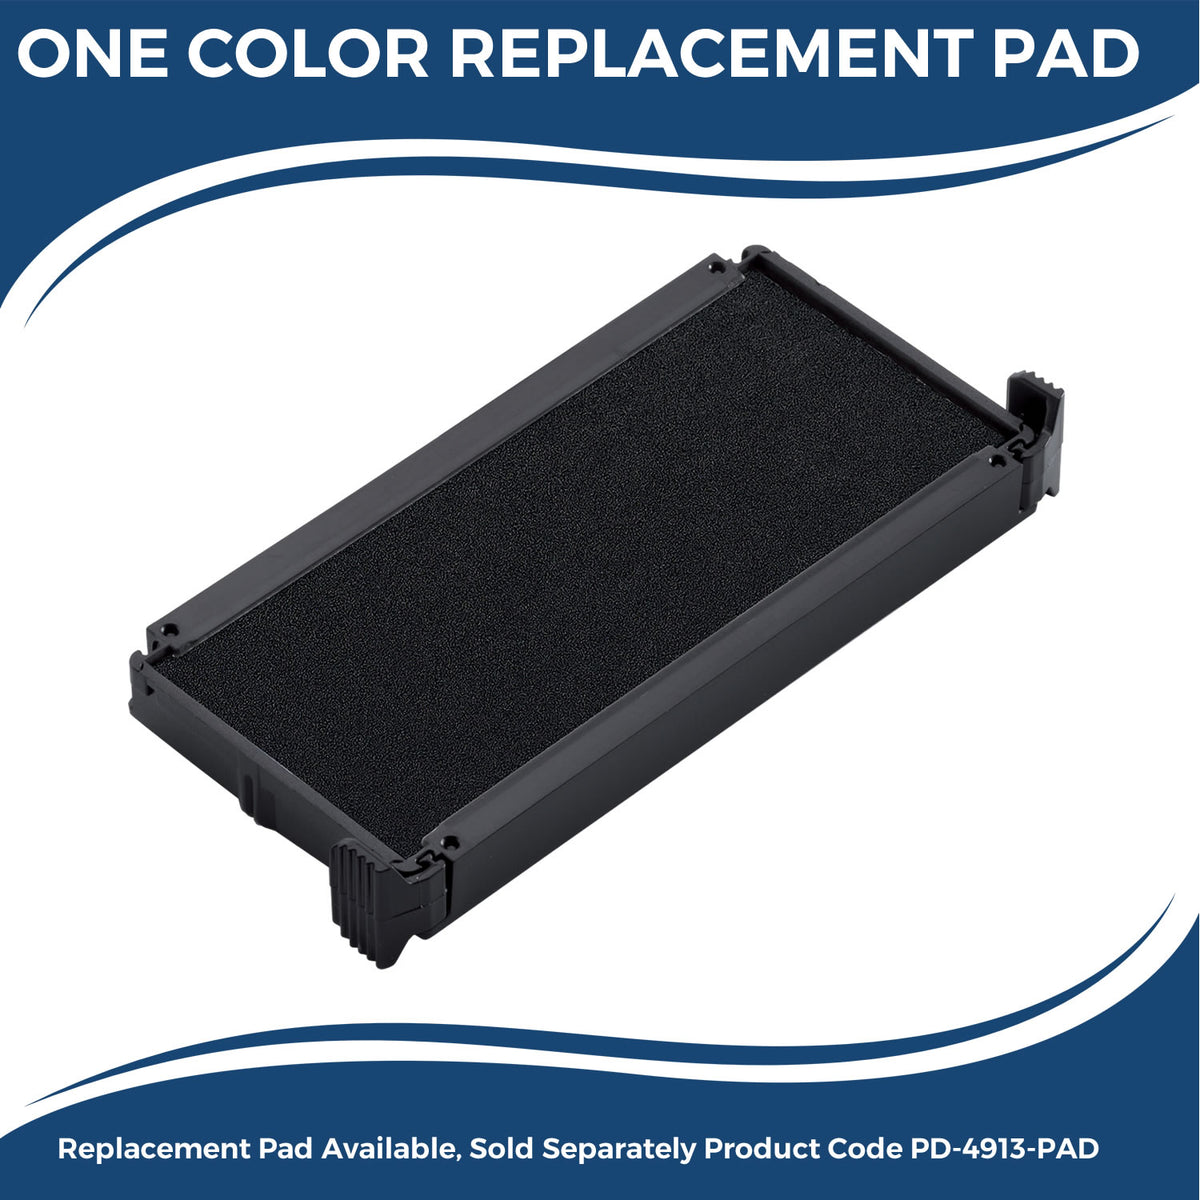 Large Self-Inking Benefits Assigned Stamp 4986S Large Replacment Pad